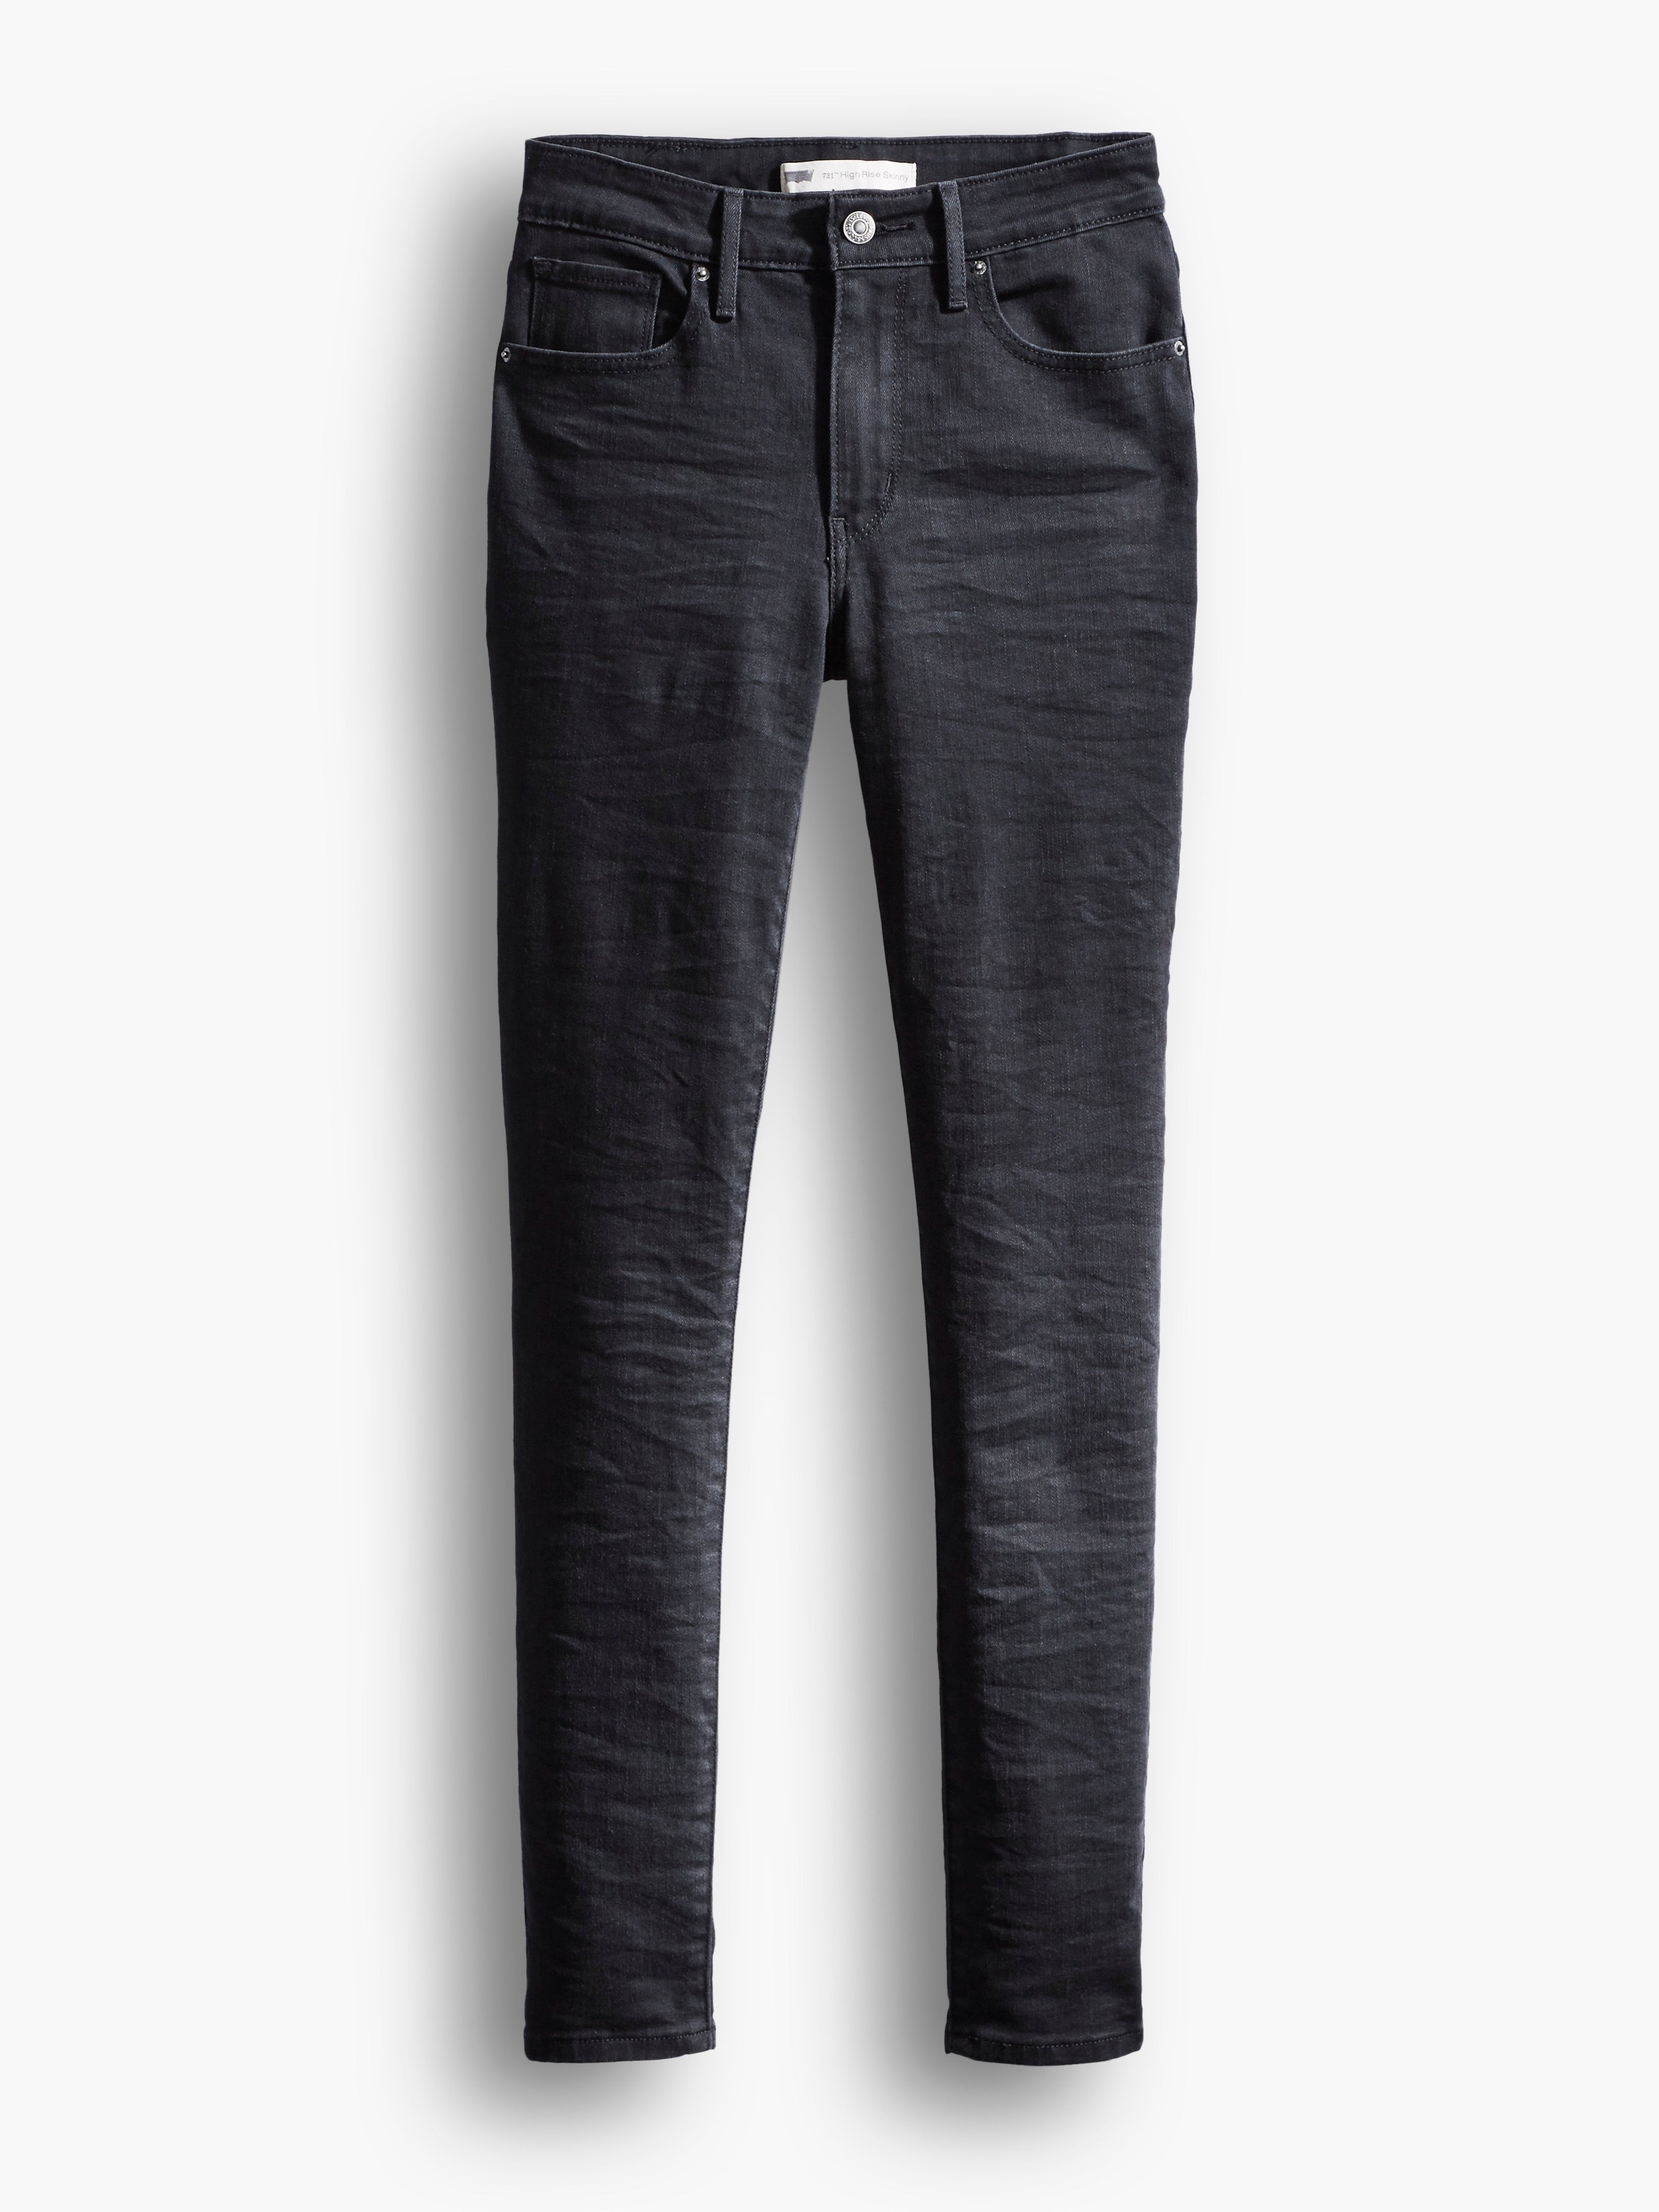 Levi’s + 721™ Modern Fit High Rise Skinny Jeans